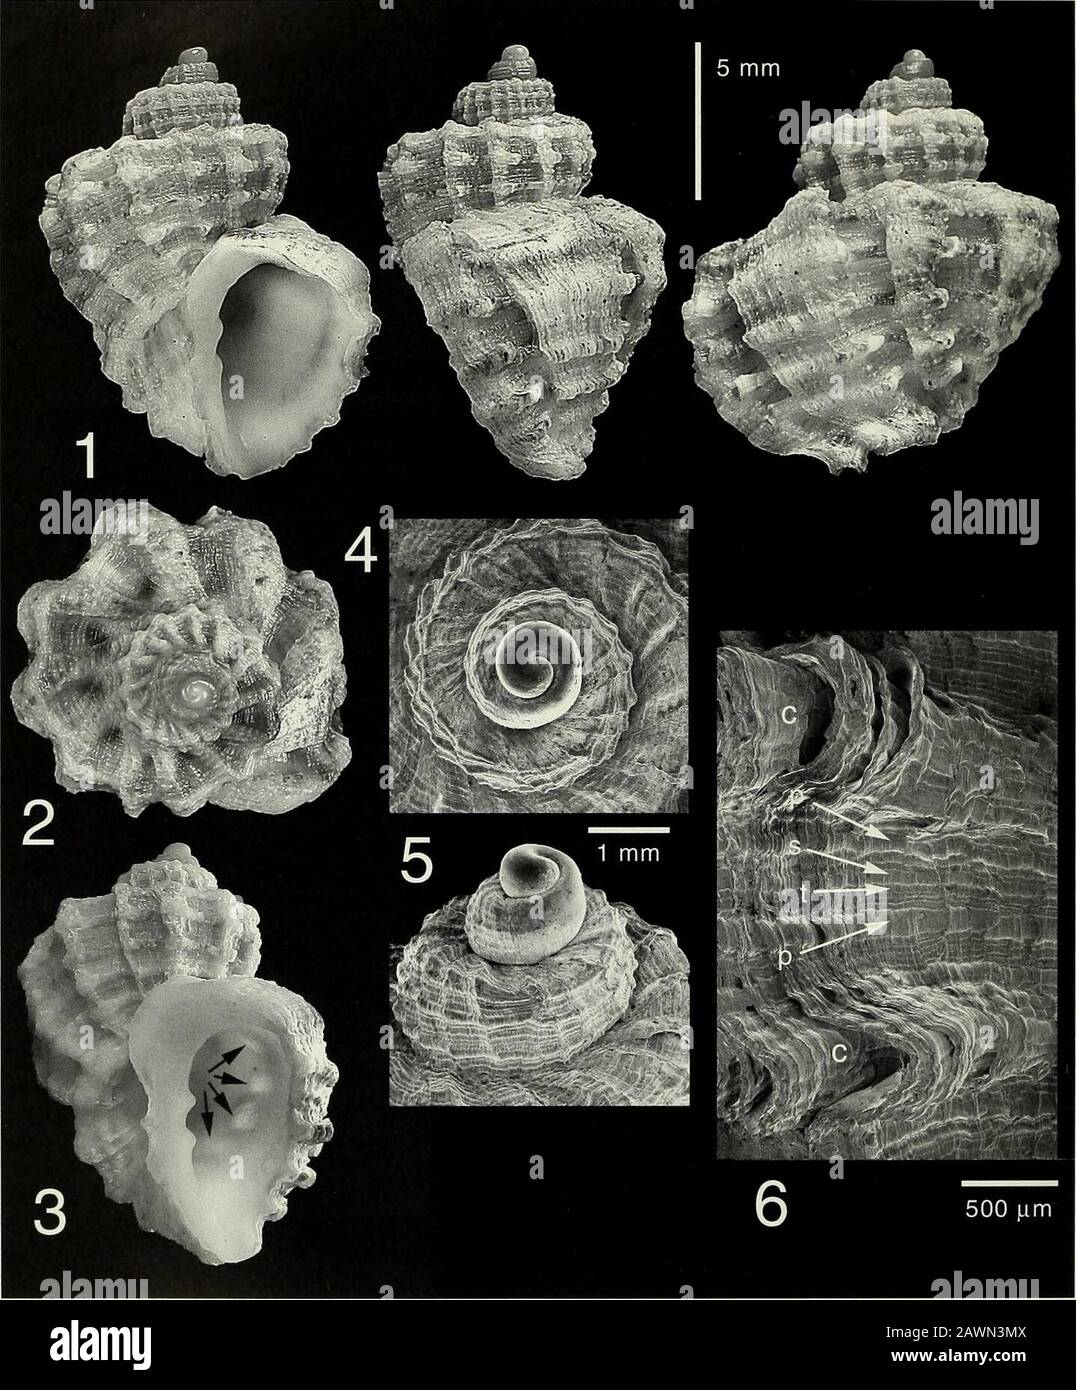 The Nautilus . lastwhorl, producing distinctive, fenestrated surface  sculp-ture. Spiral sculpture consists of strong cords (Figure 6,C) and  primary (Figure 6, p), secondary (Figure 6, s)and tertiary (Figure 6, t)  threads that